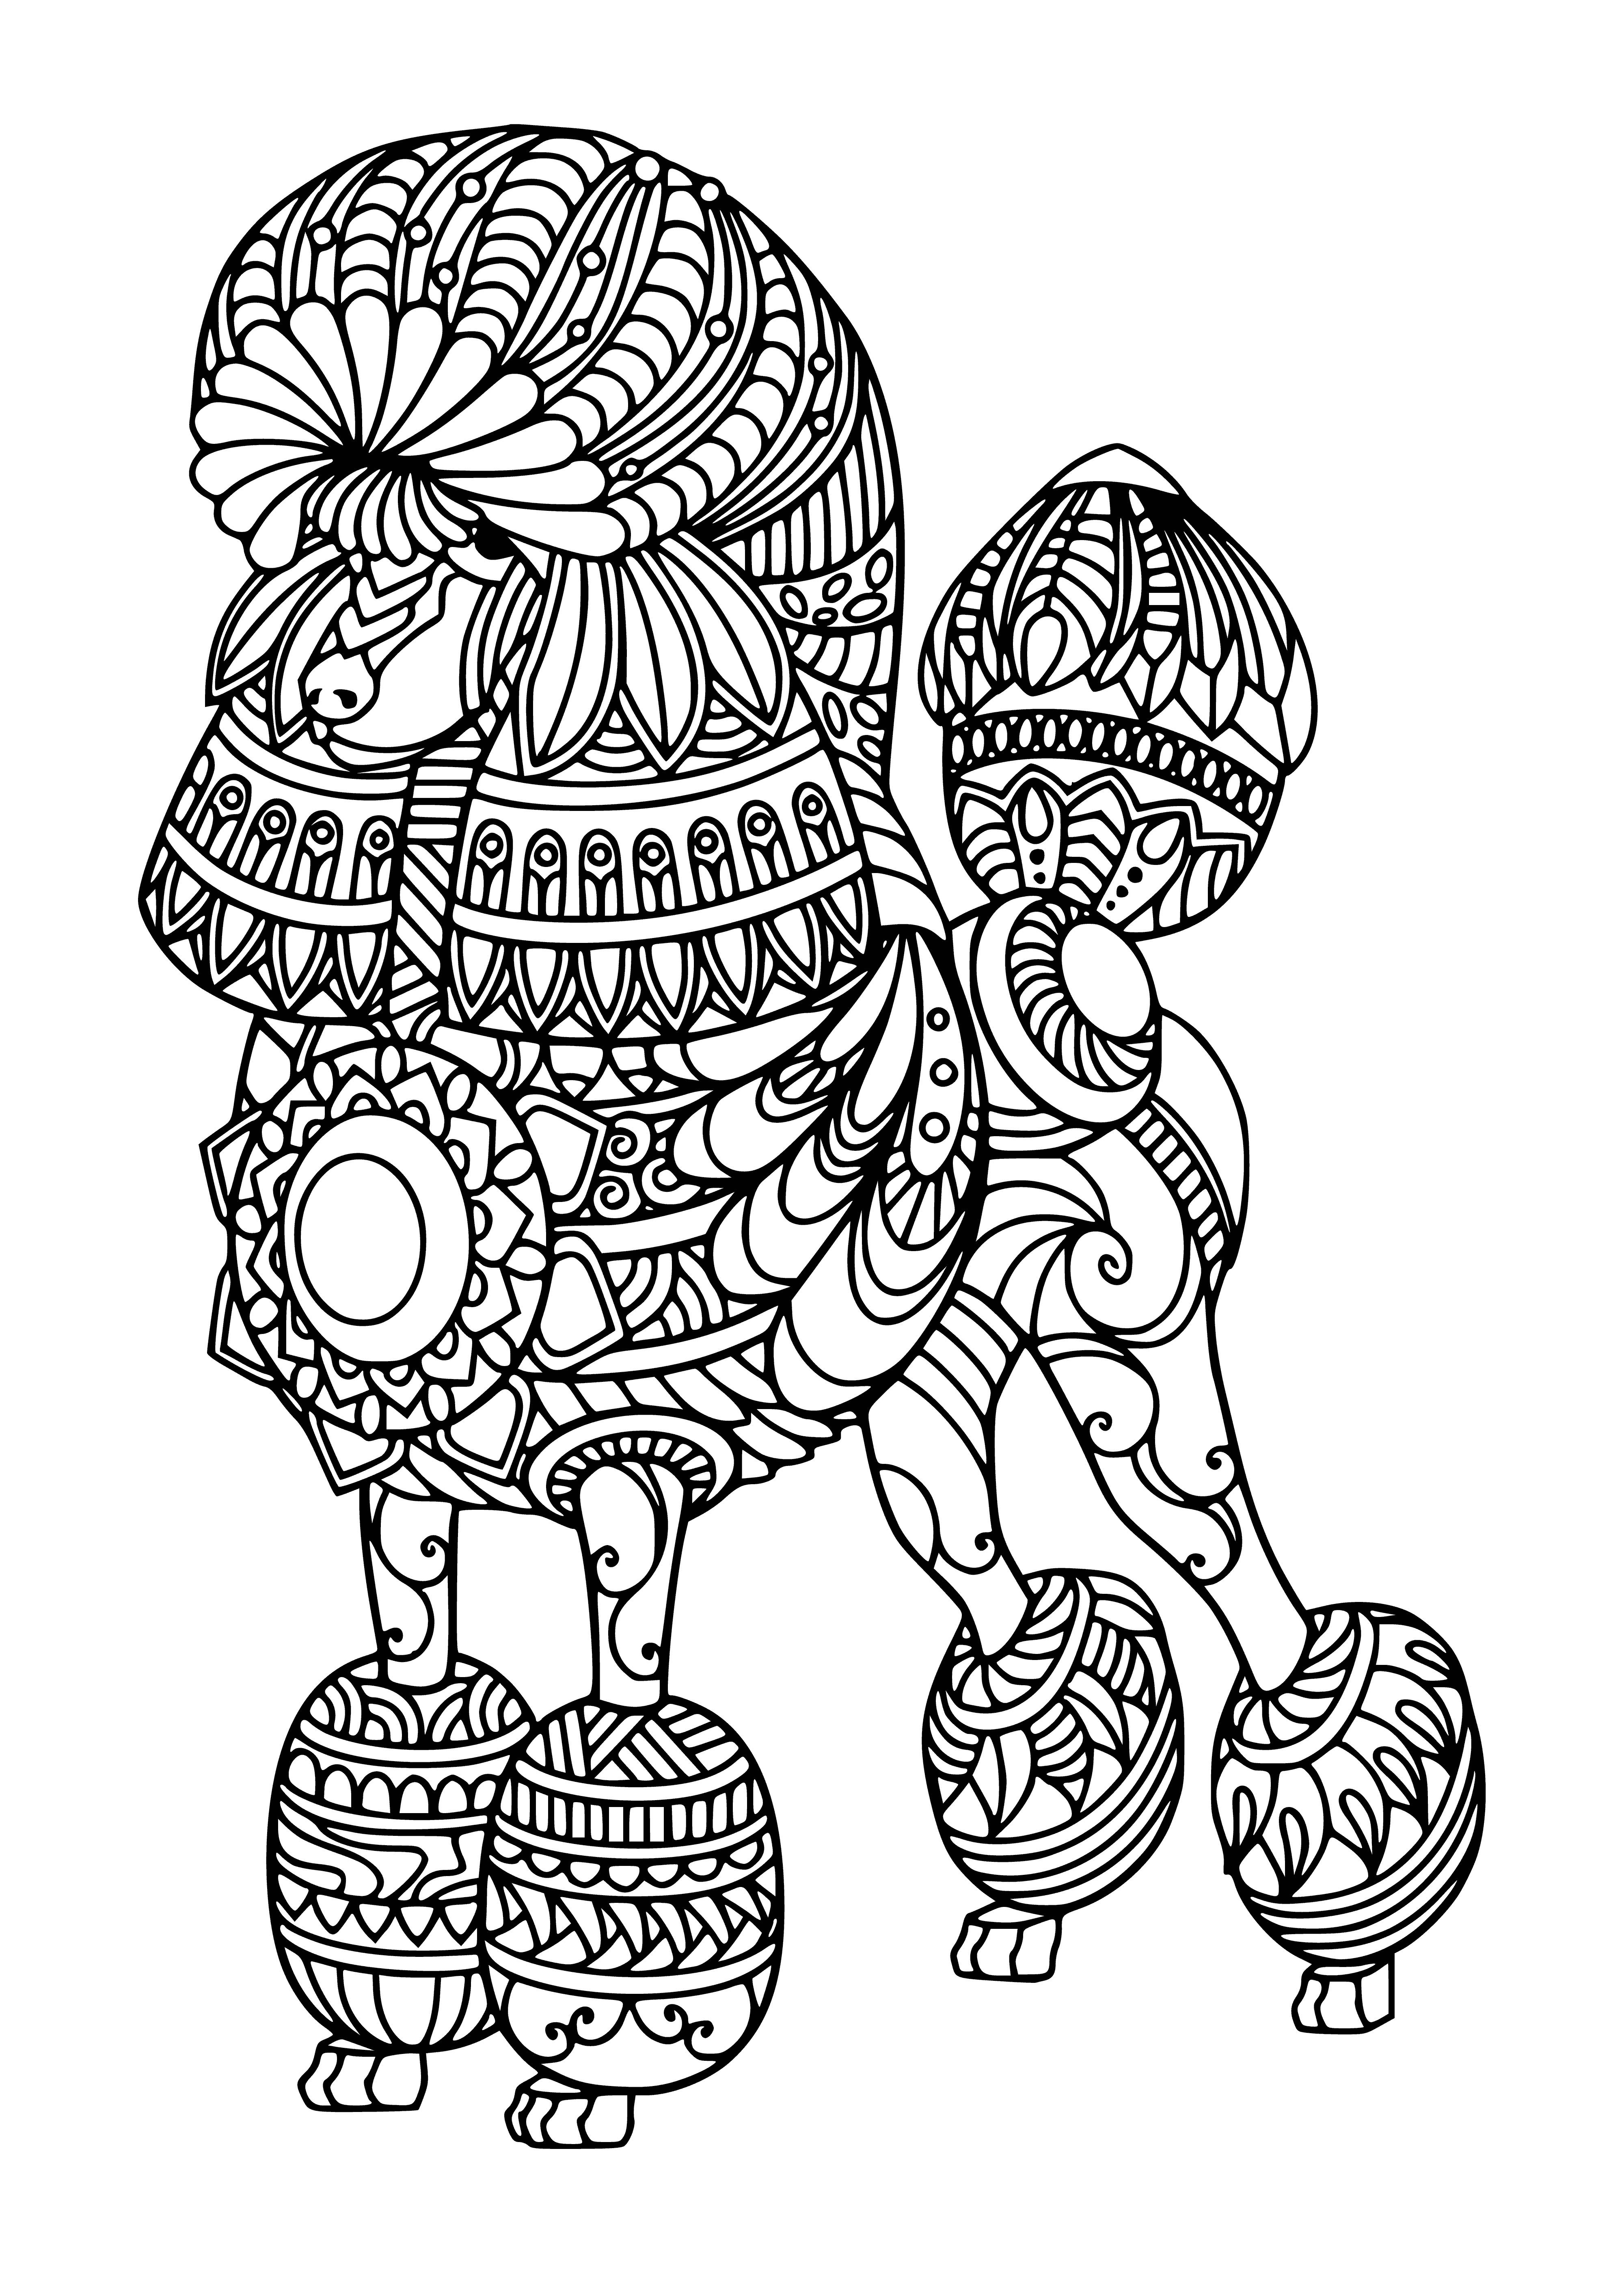 coloring page: Poodle is happy on a walk, with a perfect groomed coat and a wrinkled nose. Ready for a run!